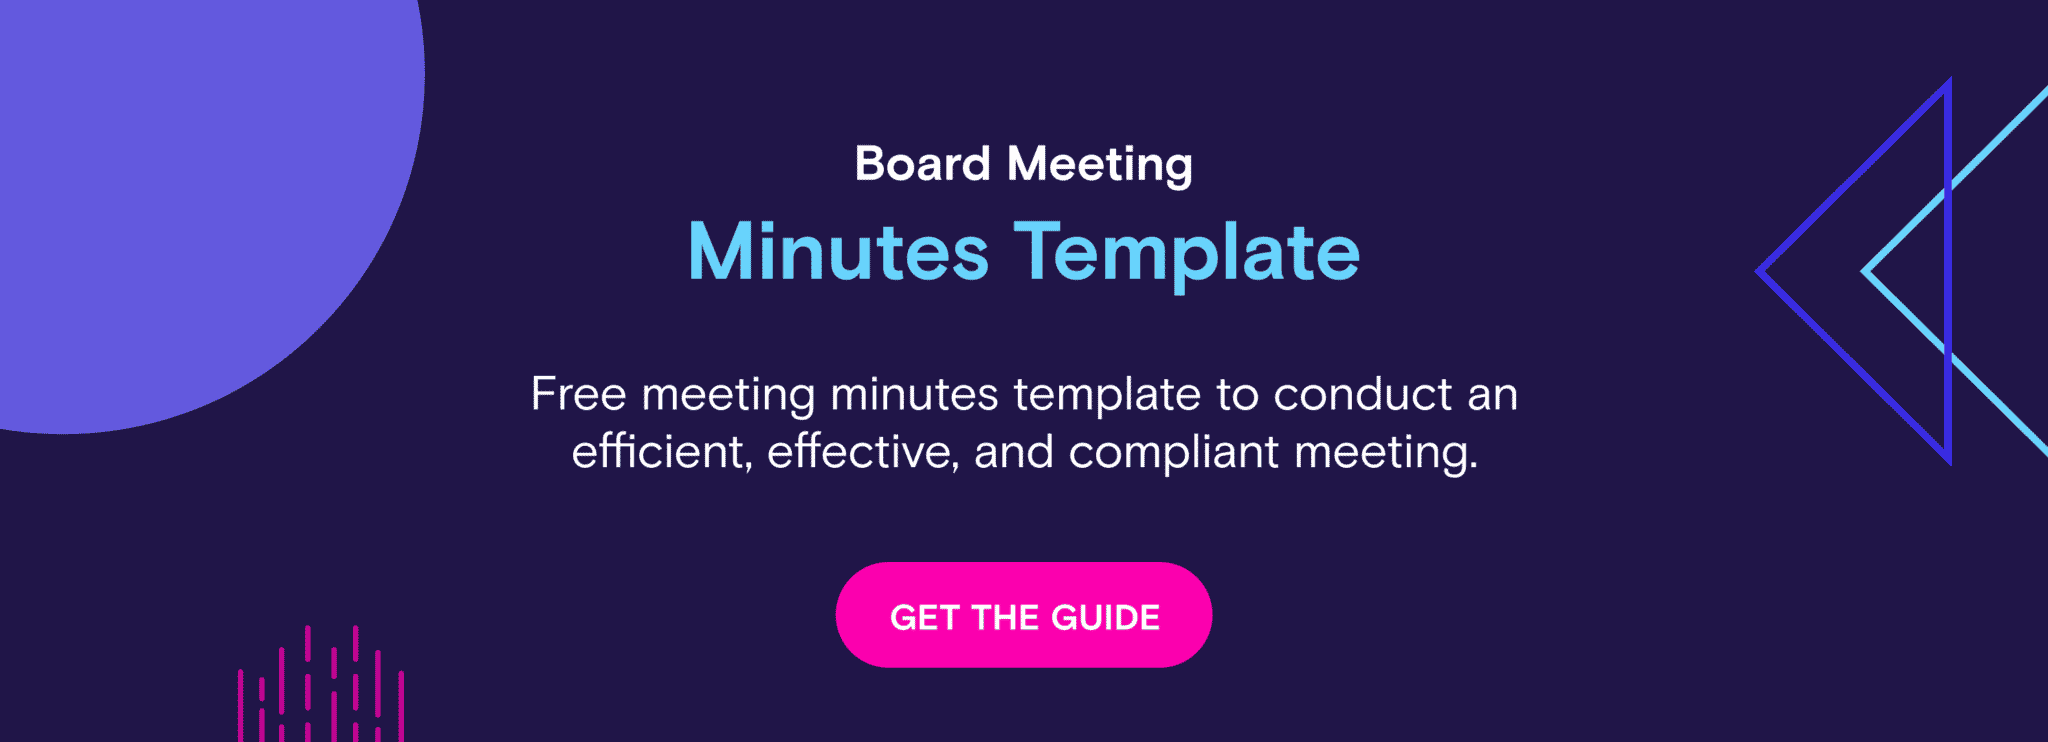 meeting-minutes-template-offer